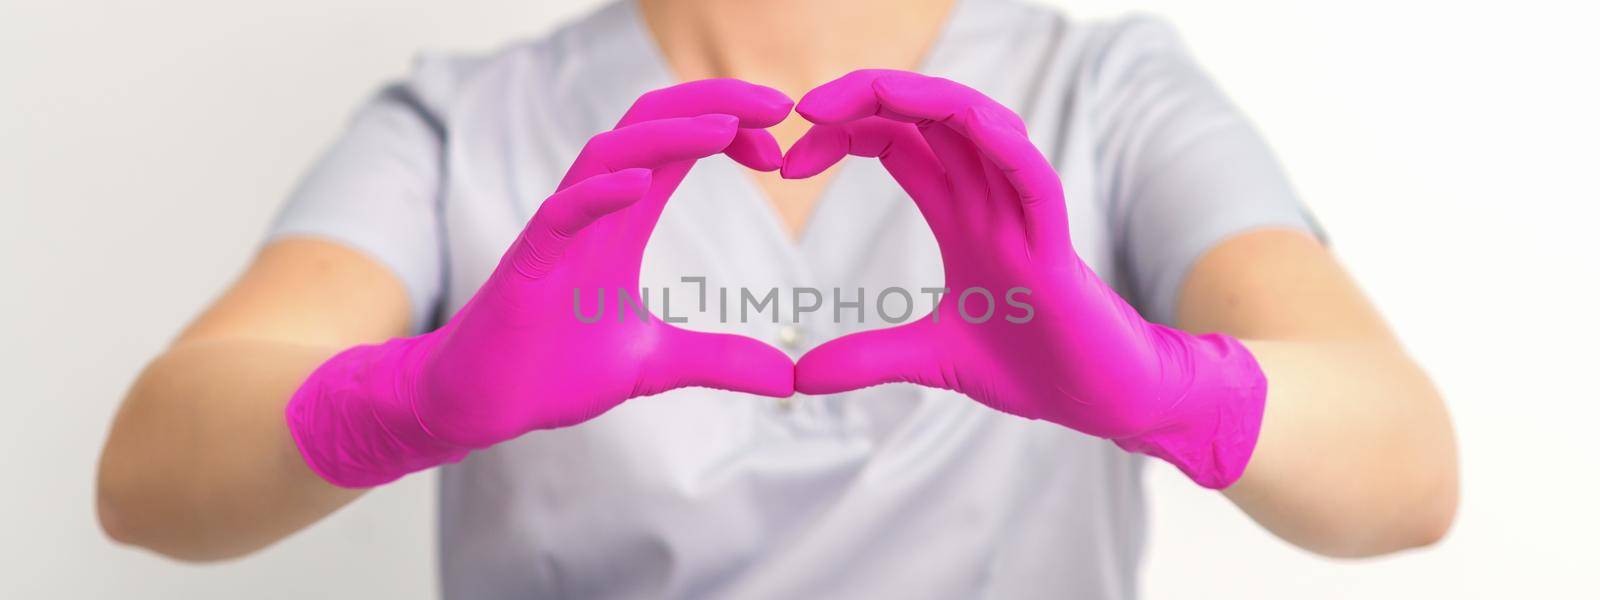 A smiling caucasian woman doctor wearing pink gloves in uniform showing the symbol of a heart against a white background. by okskukuruza